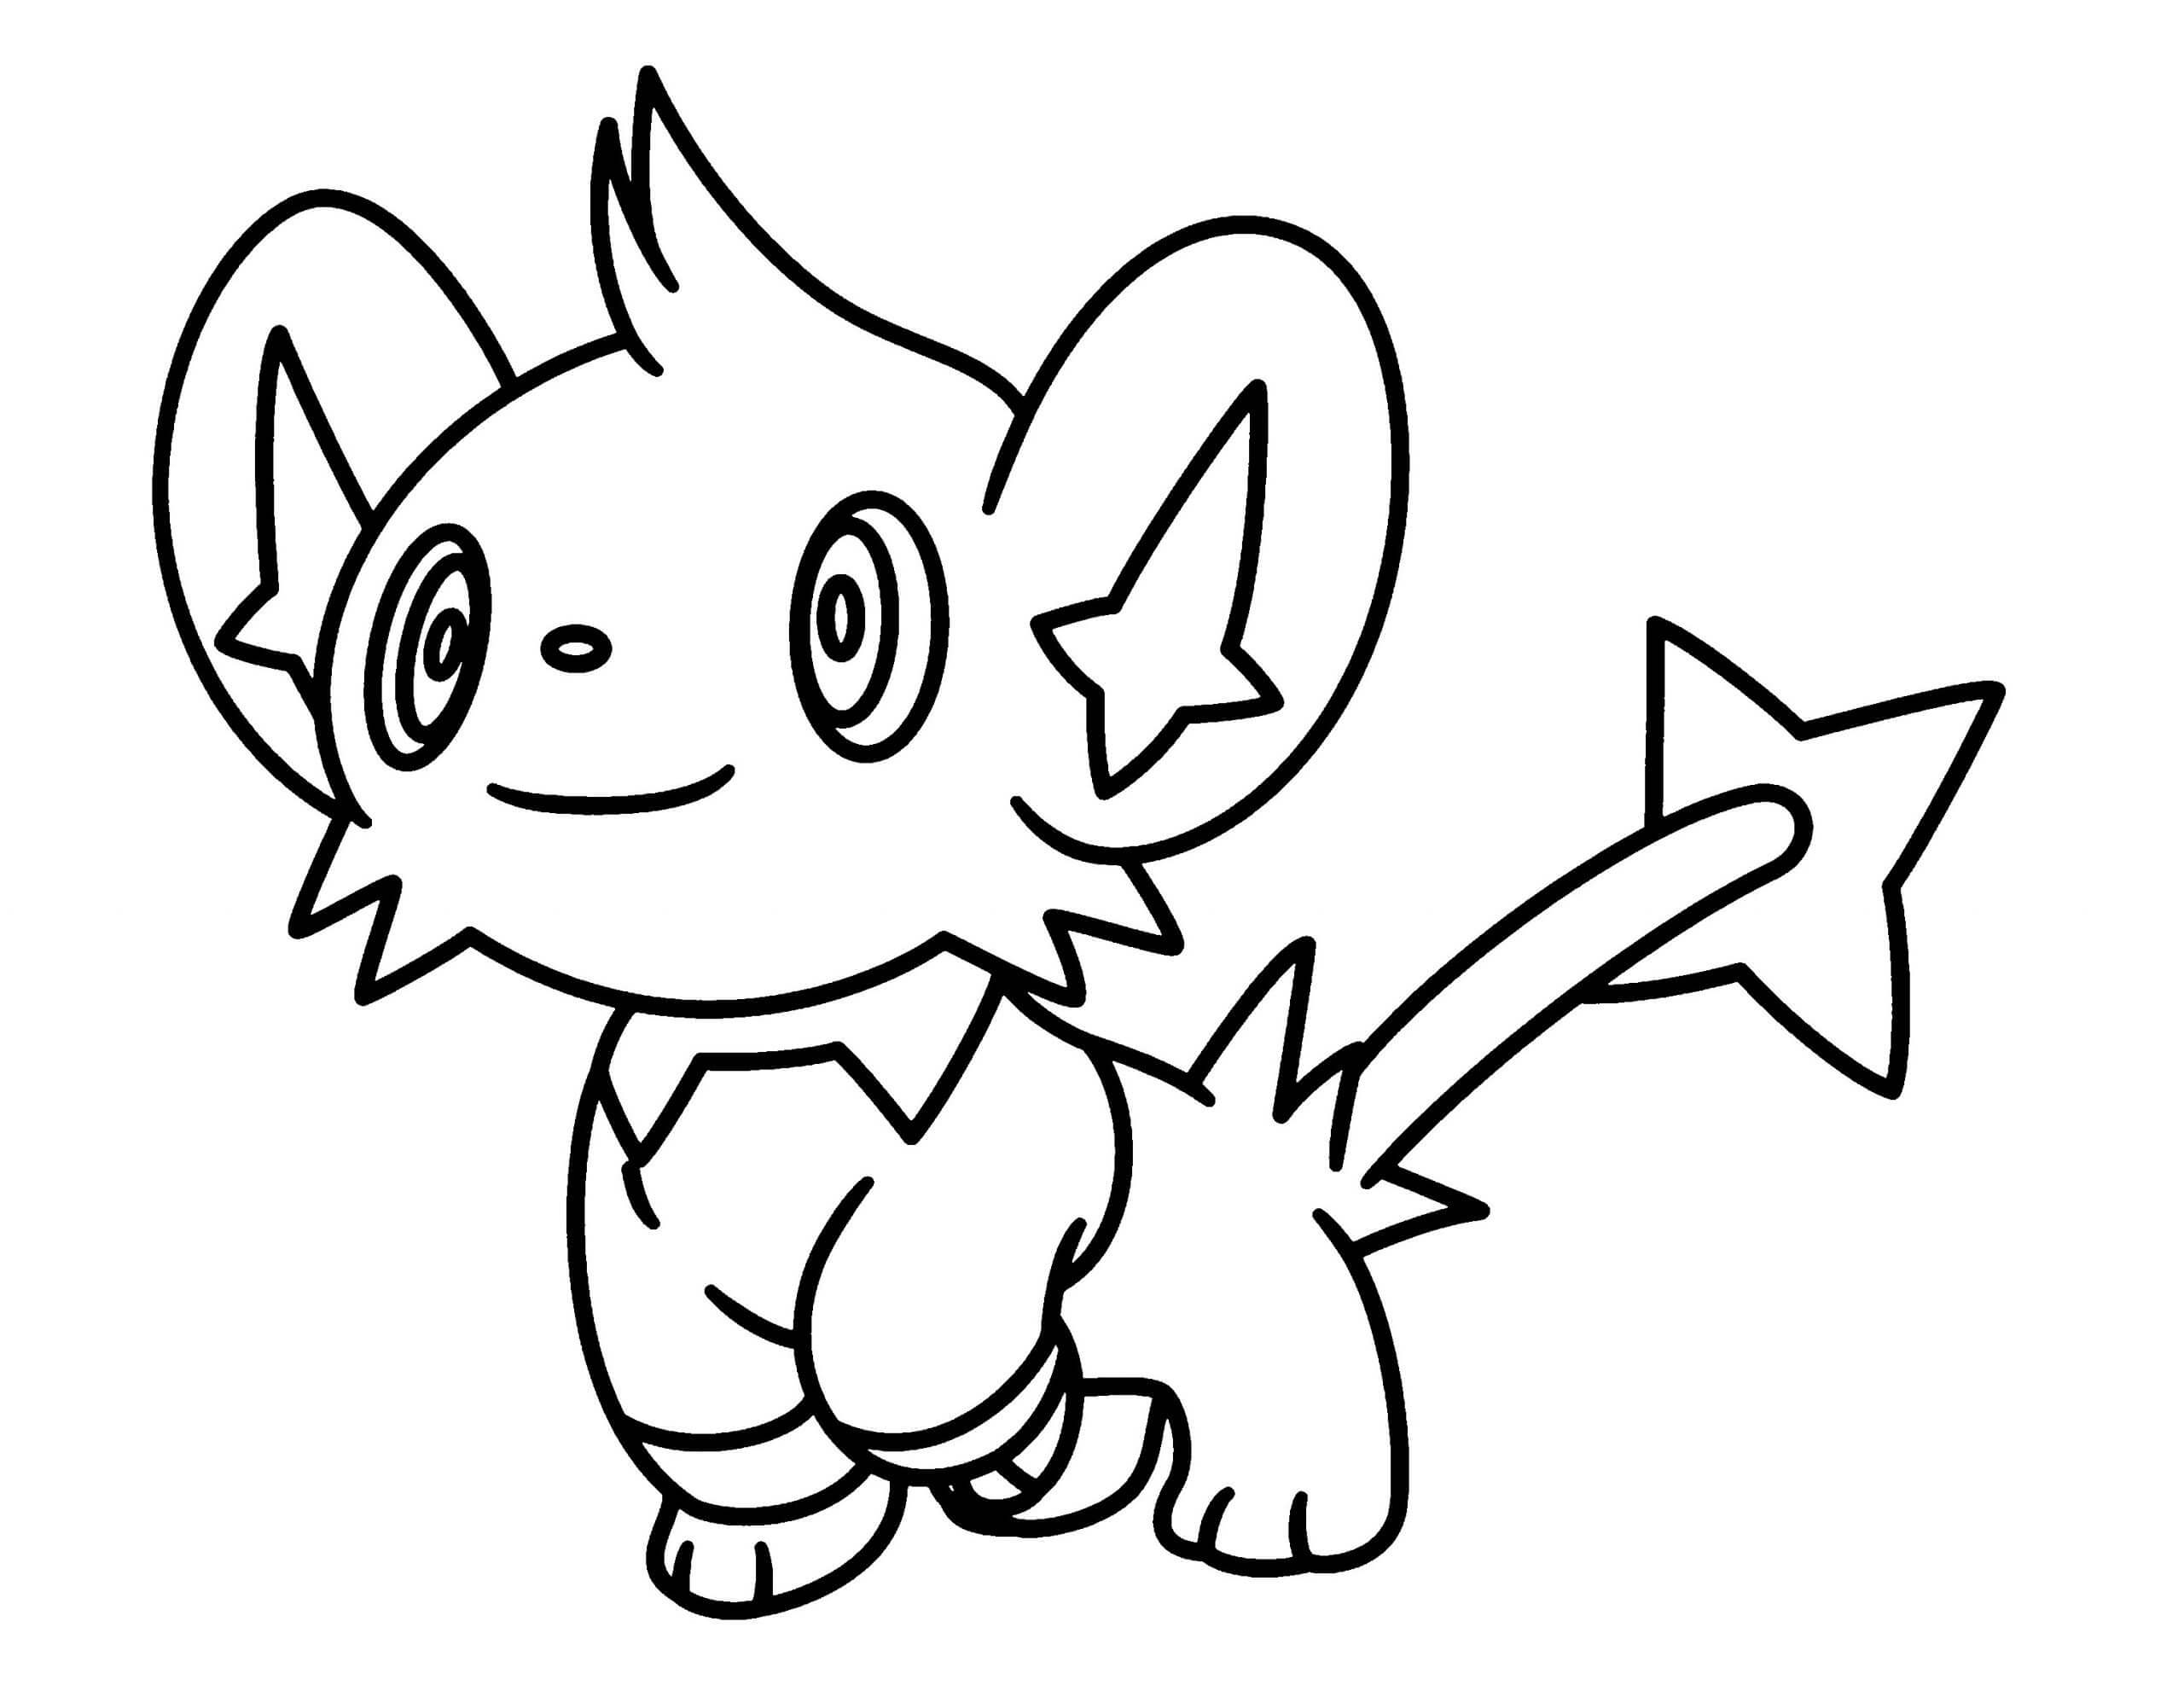 Shinx Souriant coloring page